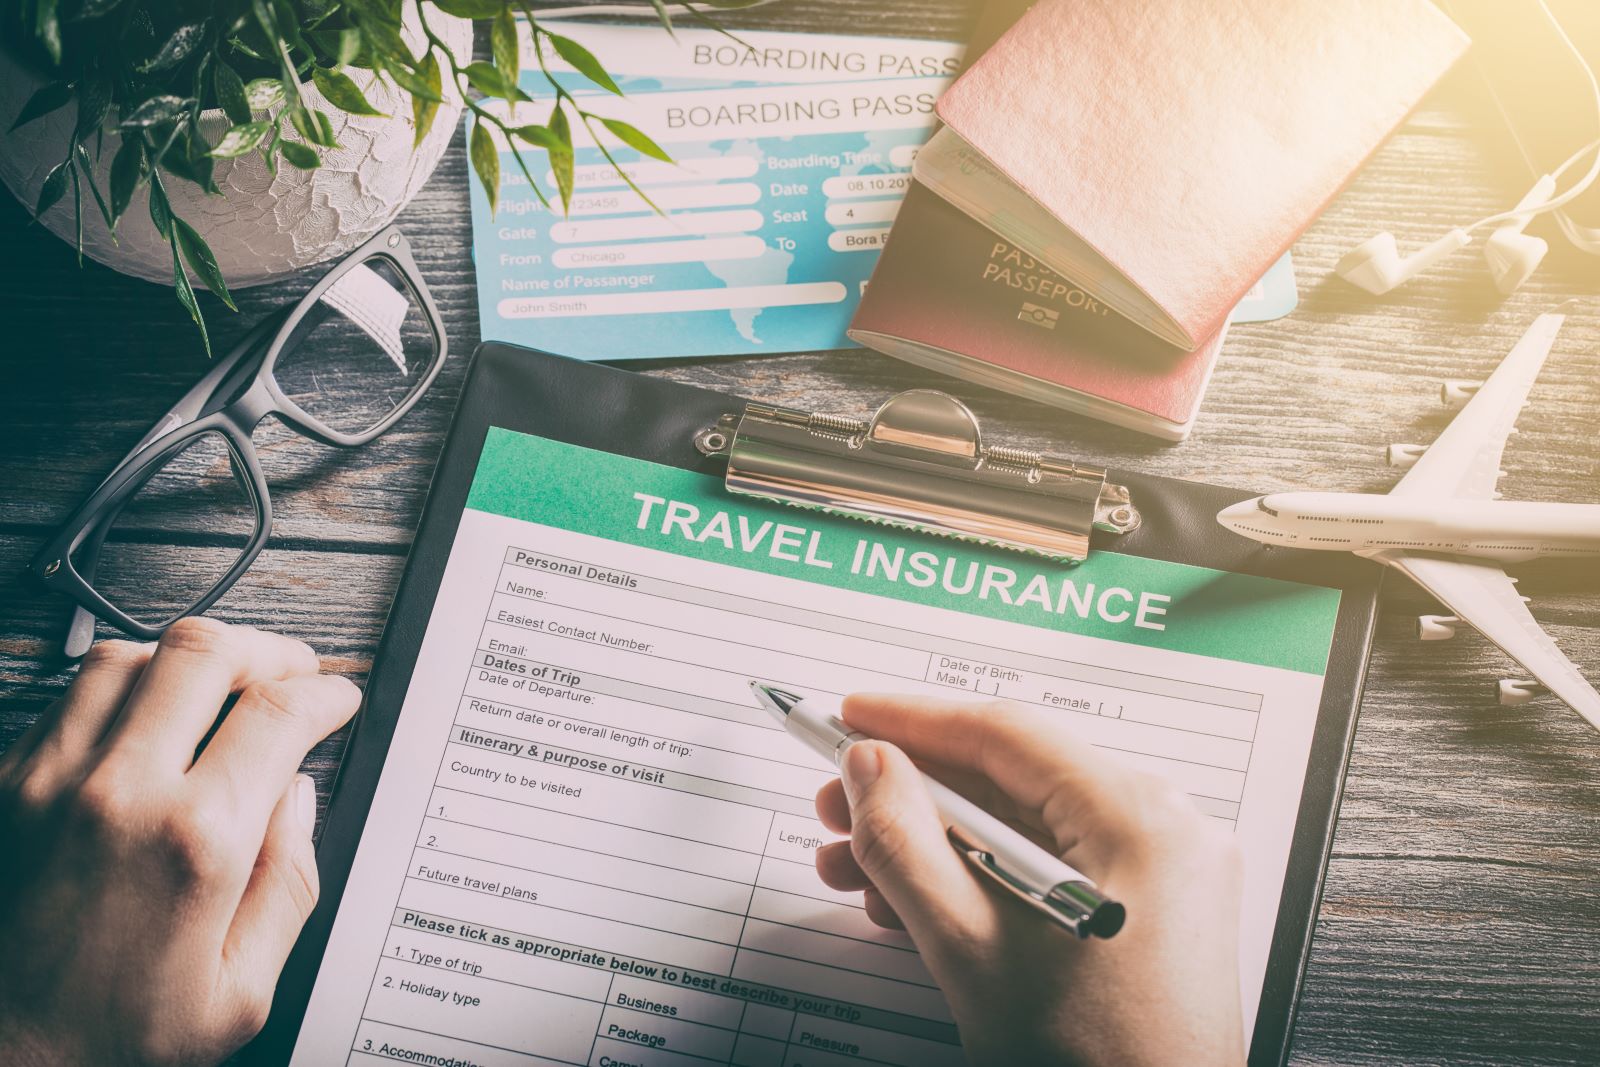 <p class="wp-caption-text">Image Credit: Shutterstock / REDPIXEL.PL</p>  <p>Comprehensive travel insurance that includes medical coverage can be a lifeline in case of health emergencies abroad. These policies typically cover everything from hospital stays to emergency medical evacuations, potentially saving thousands of dollars.</p>